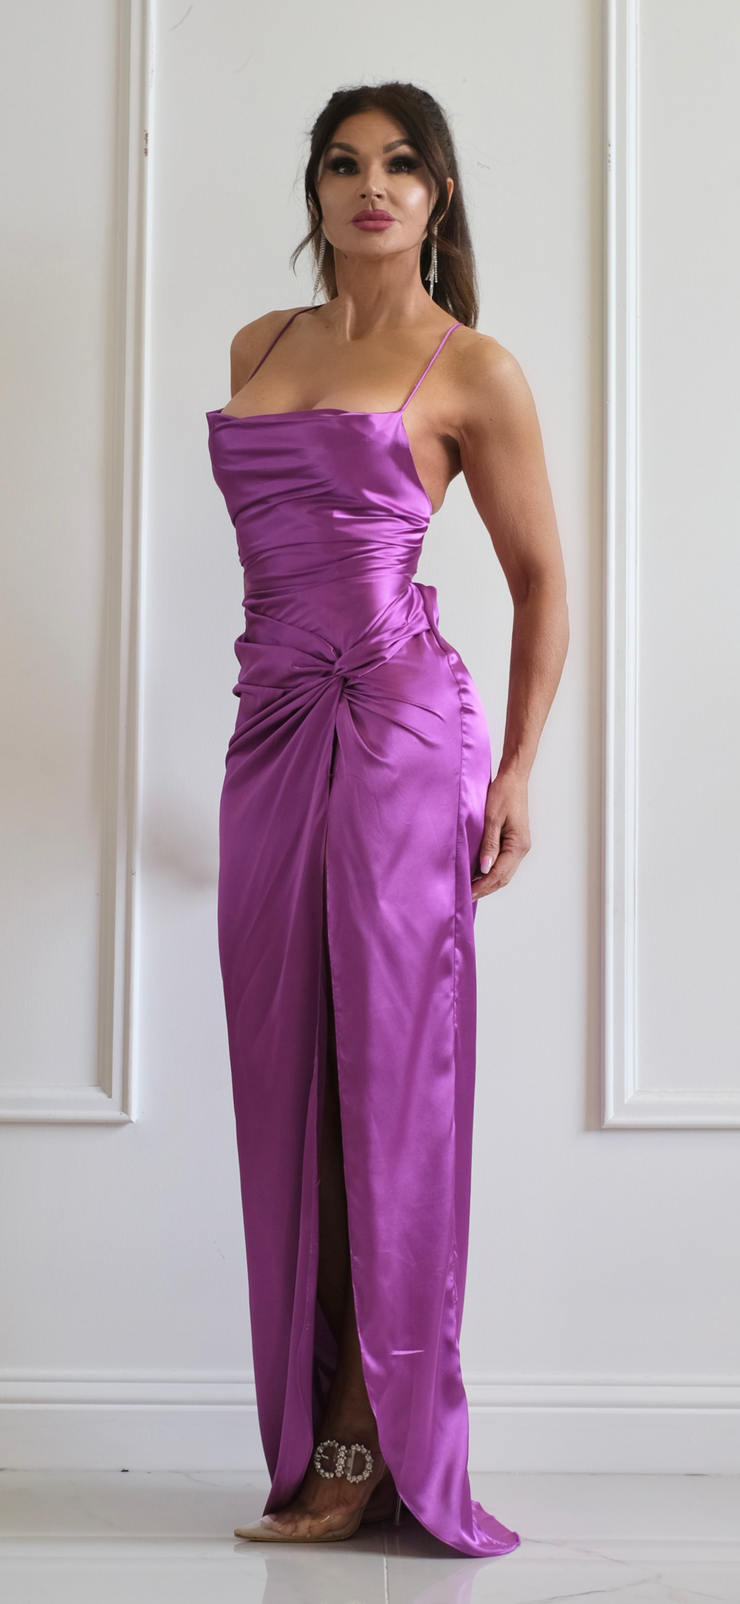 The Hailey Orchid Satin Front Twist Formal